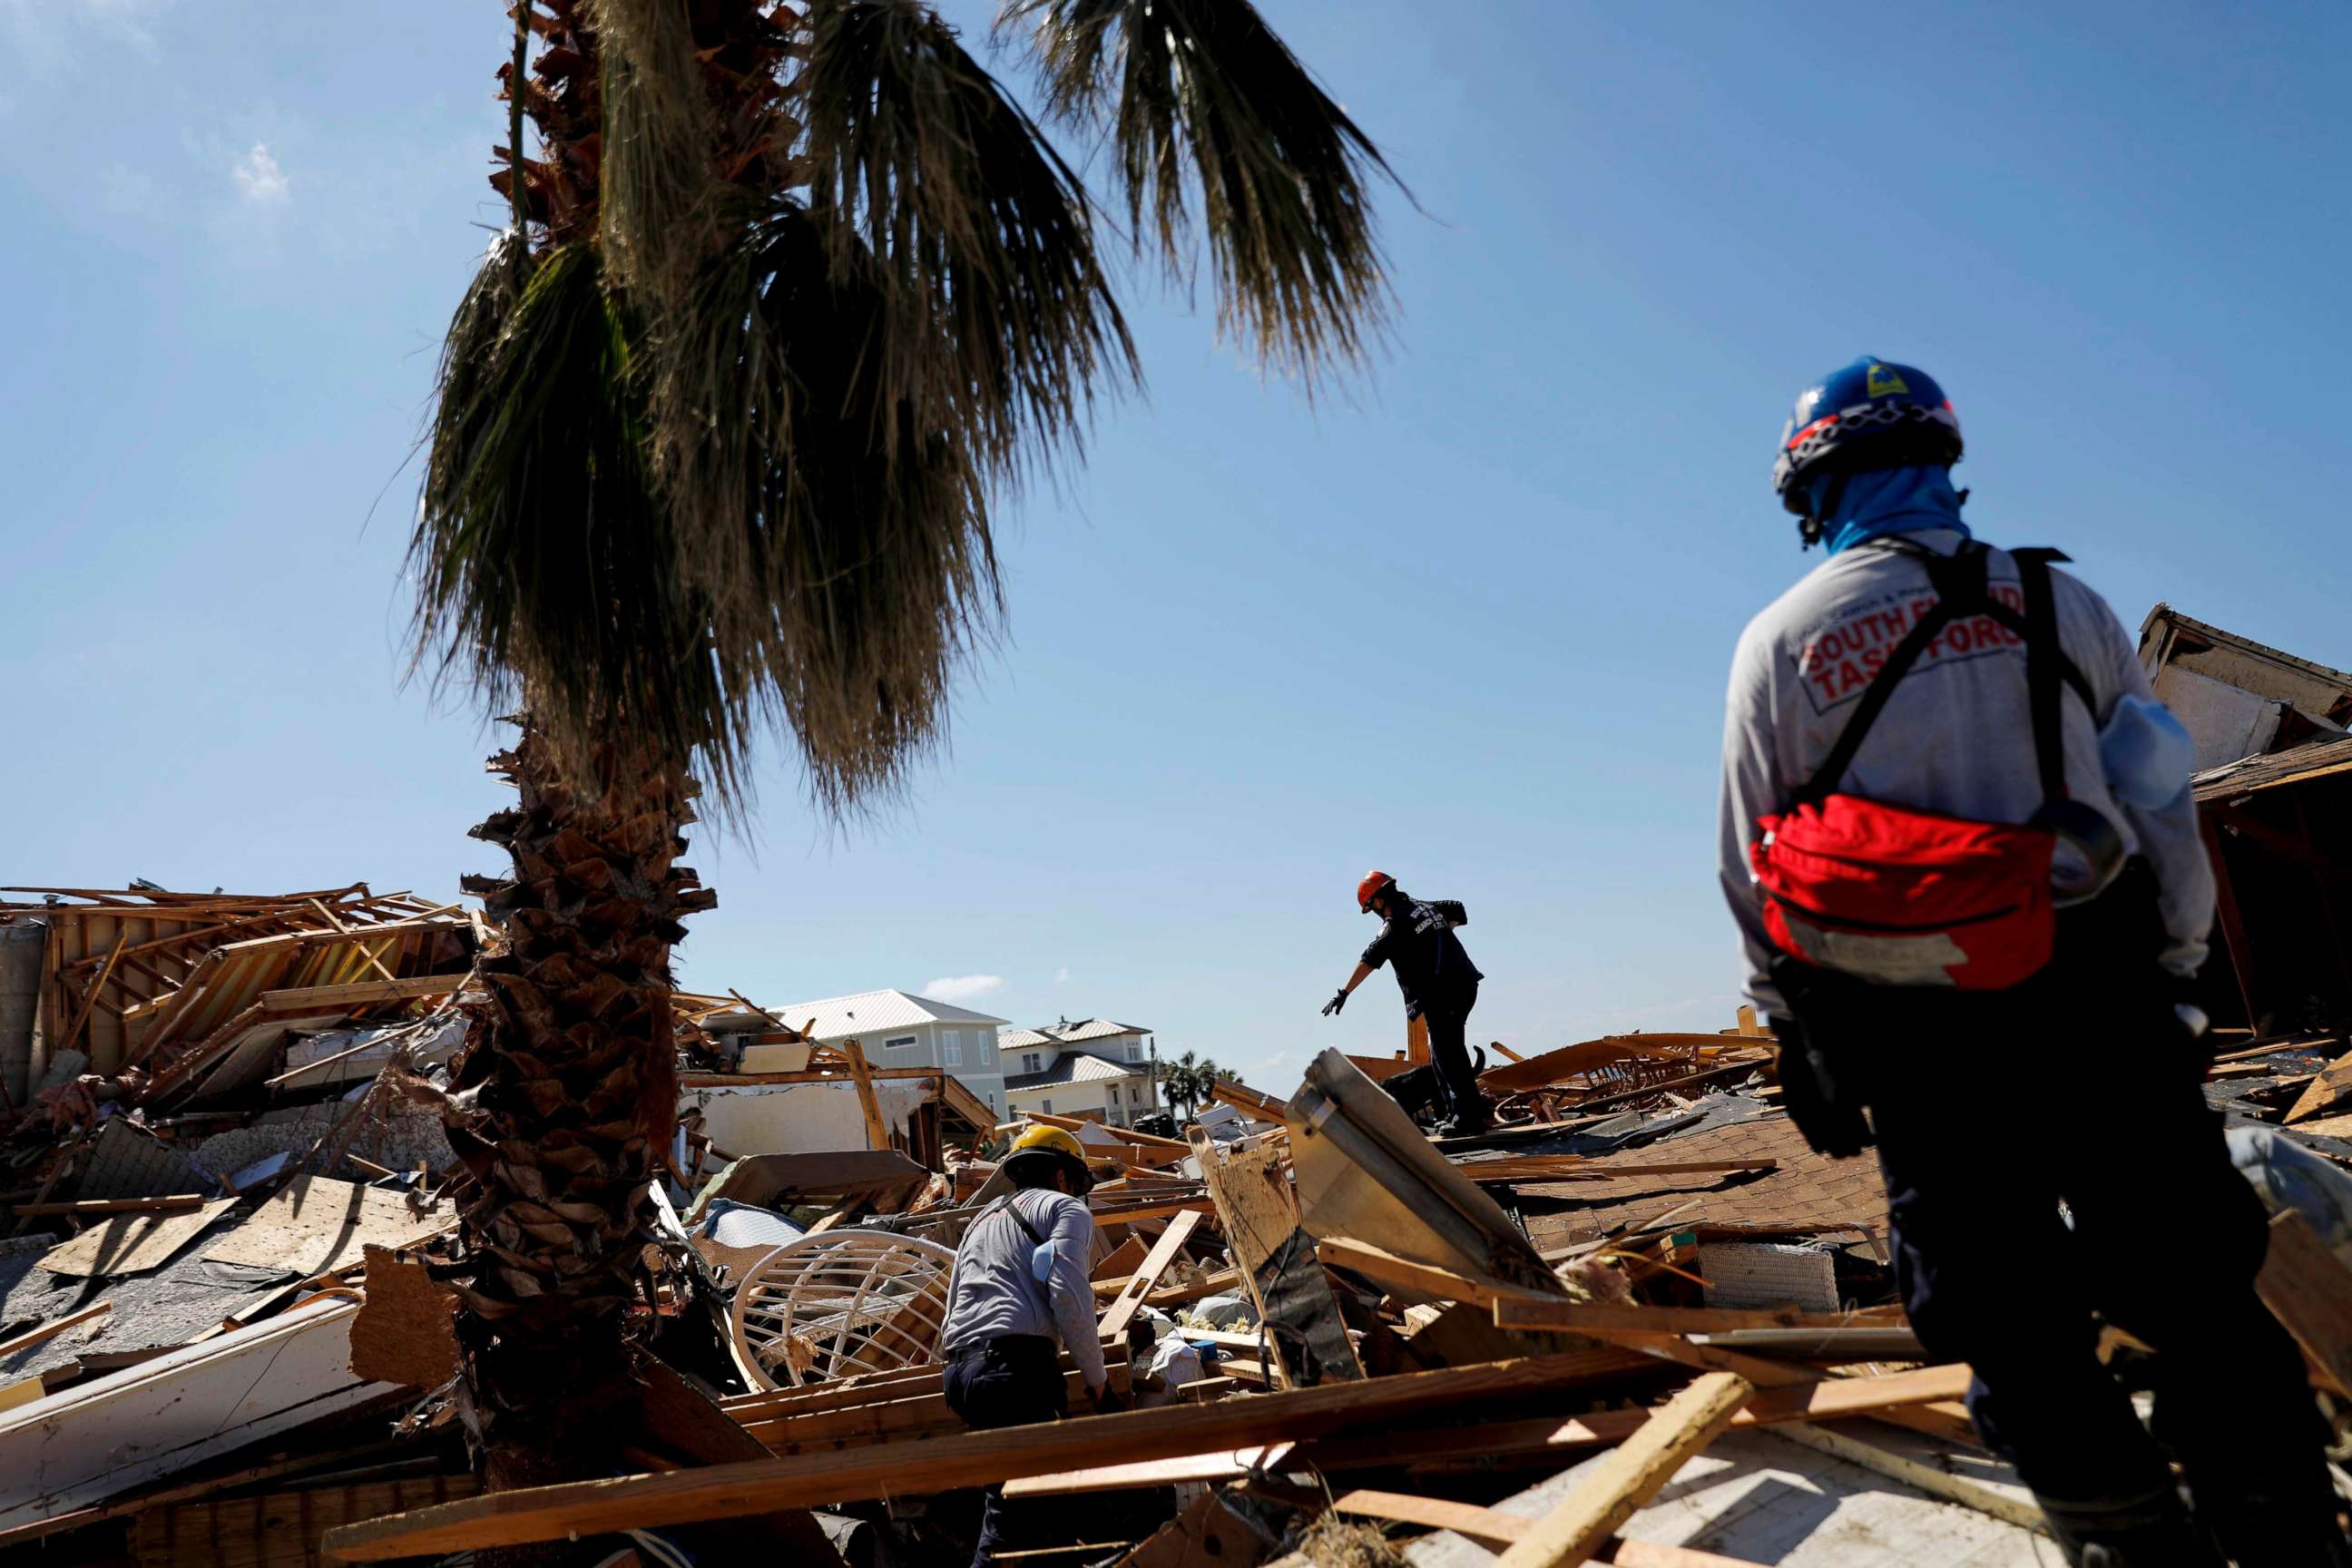 PHOTO: Members of a South Florida urban search and rescue team sift through a debris pile for survivors of Hurricane Michael in Mexico Beach, Fla., Oct. 14, 2018.